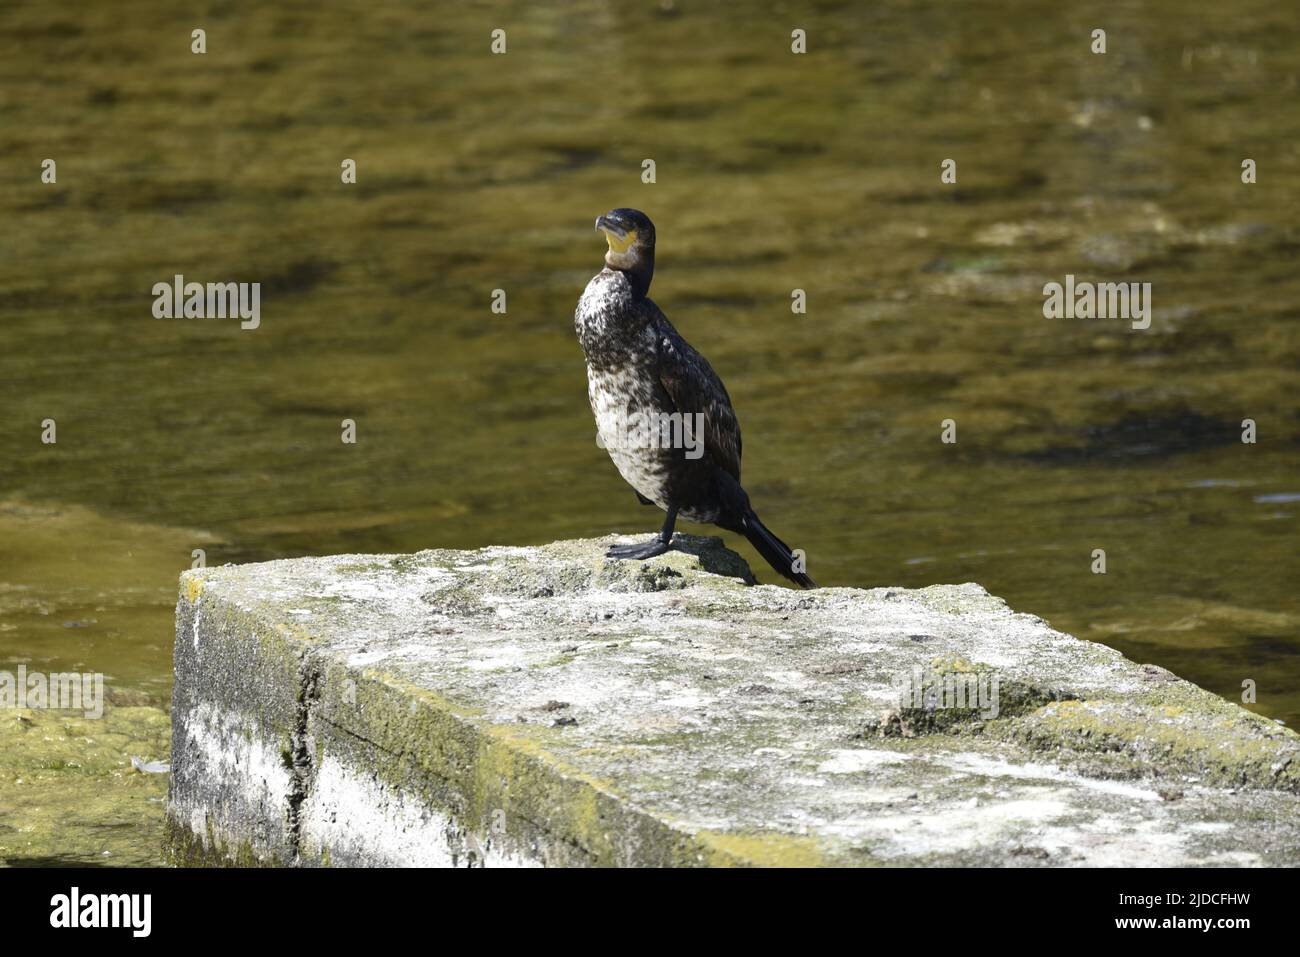 Close-Up, Left-Profile Image of an Immature Great Cormorant (Phalacrocorax carbo) Standing in the Sun on a Concrete Platform on a Lake in June, UK Stock Photo